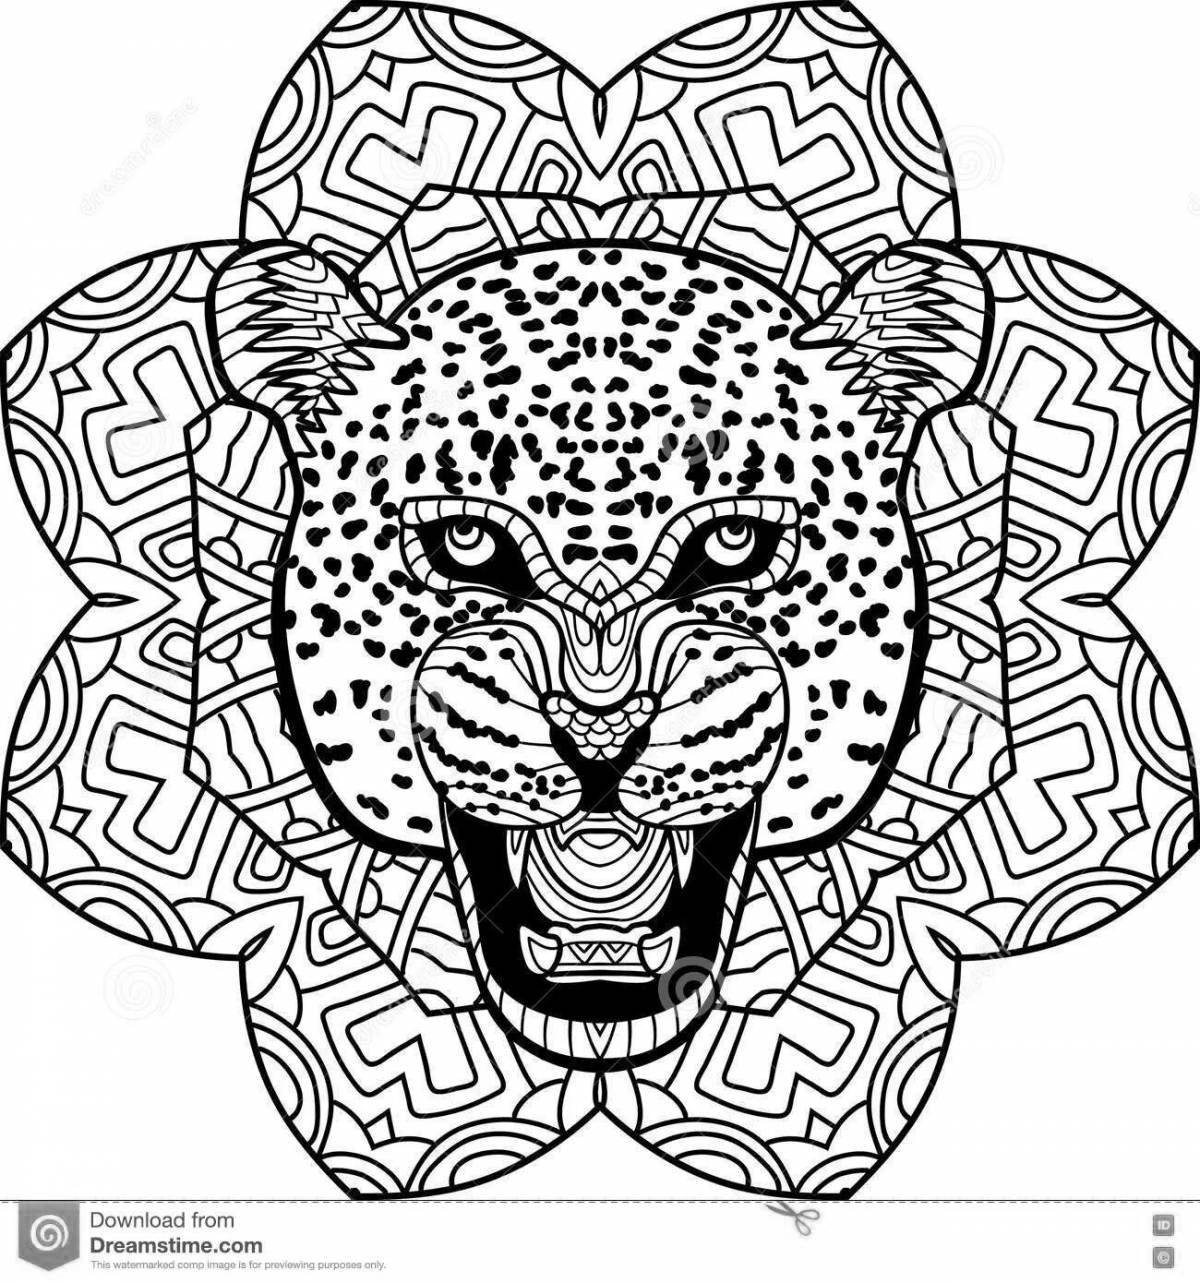 Outstanding leopard antistress coloring book